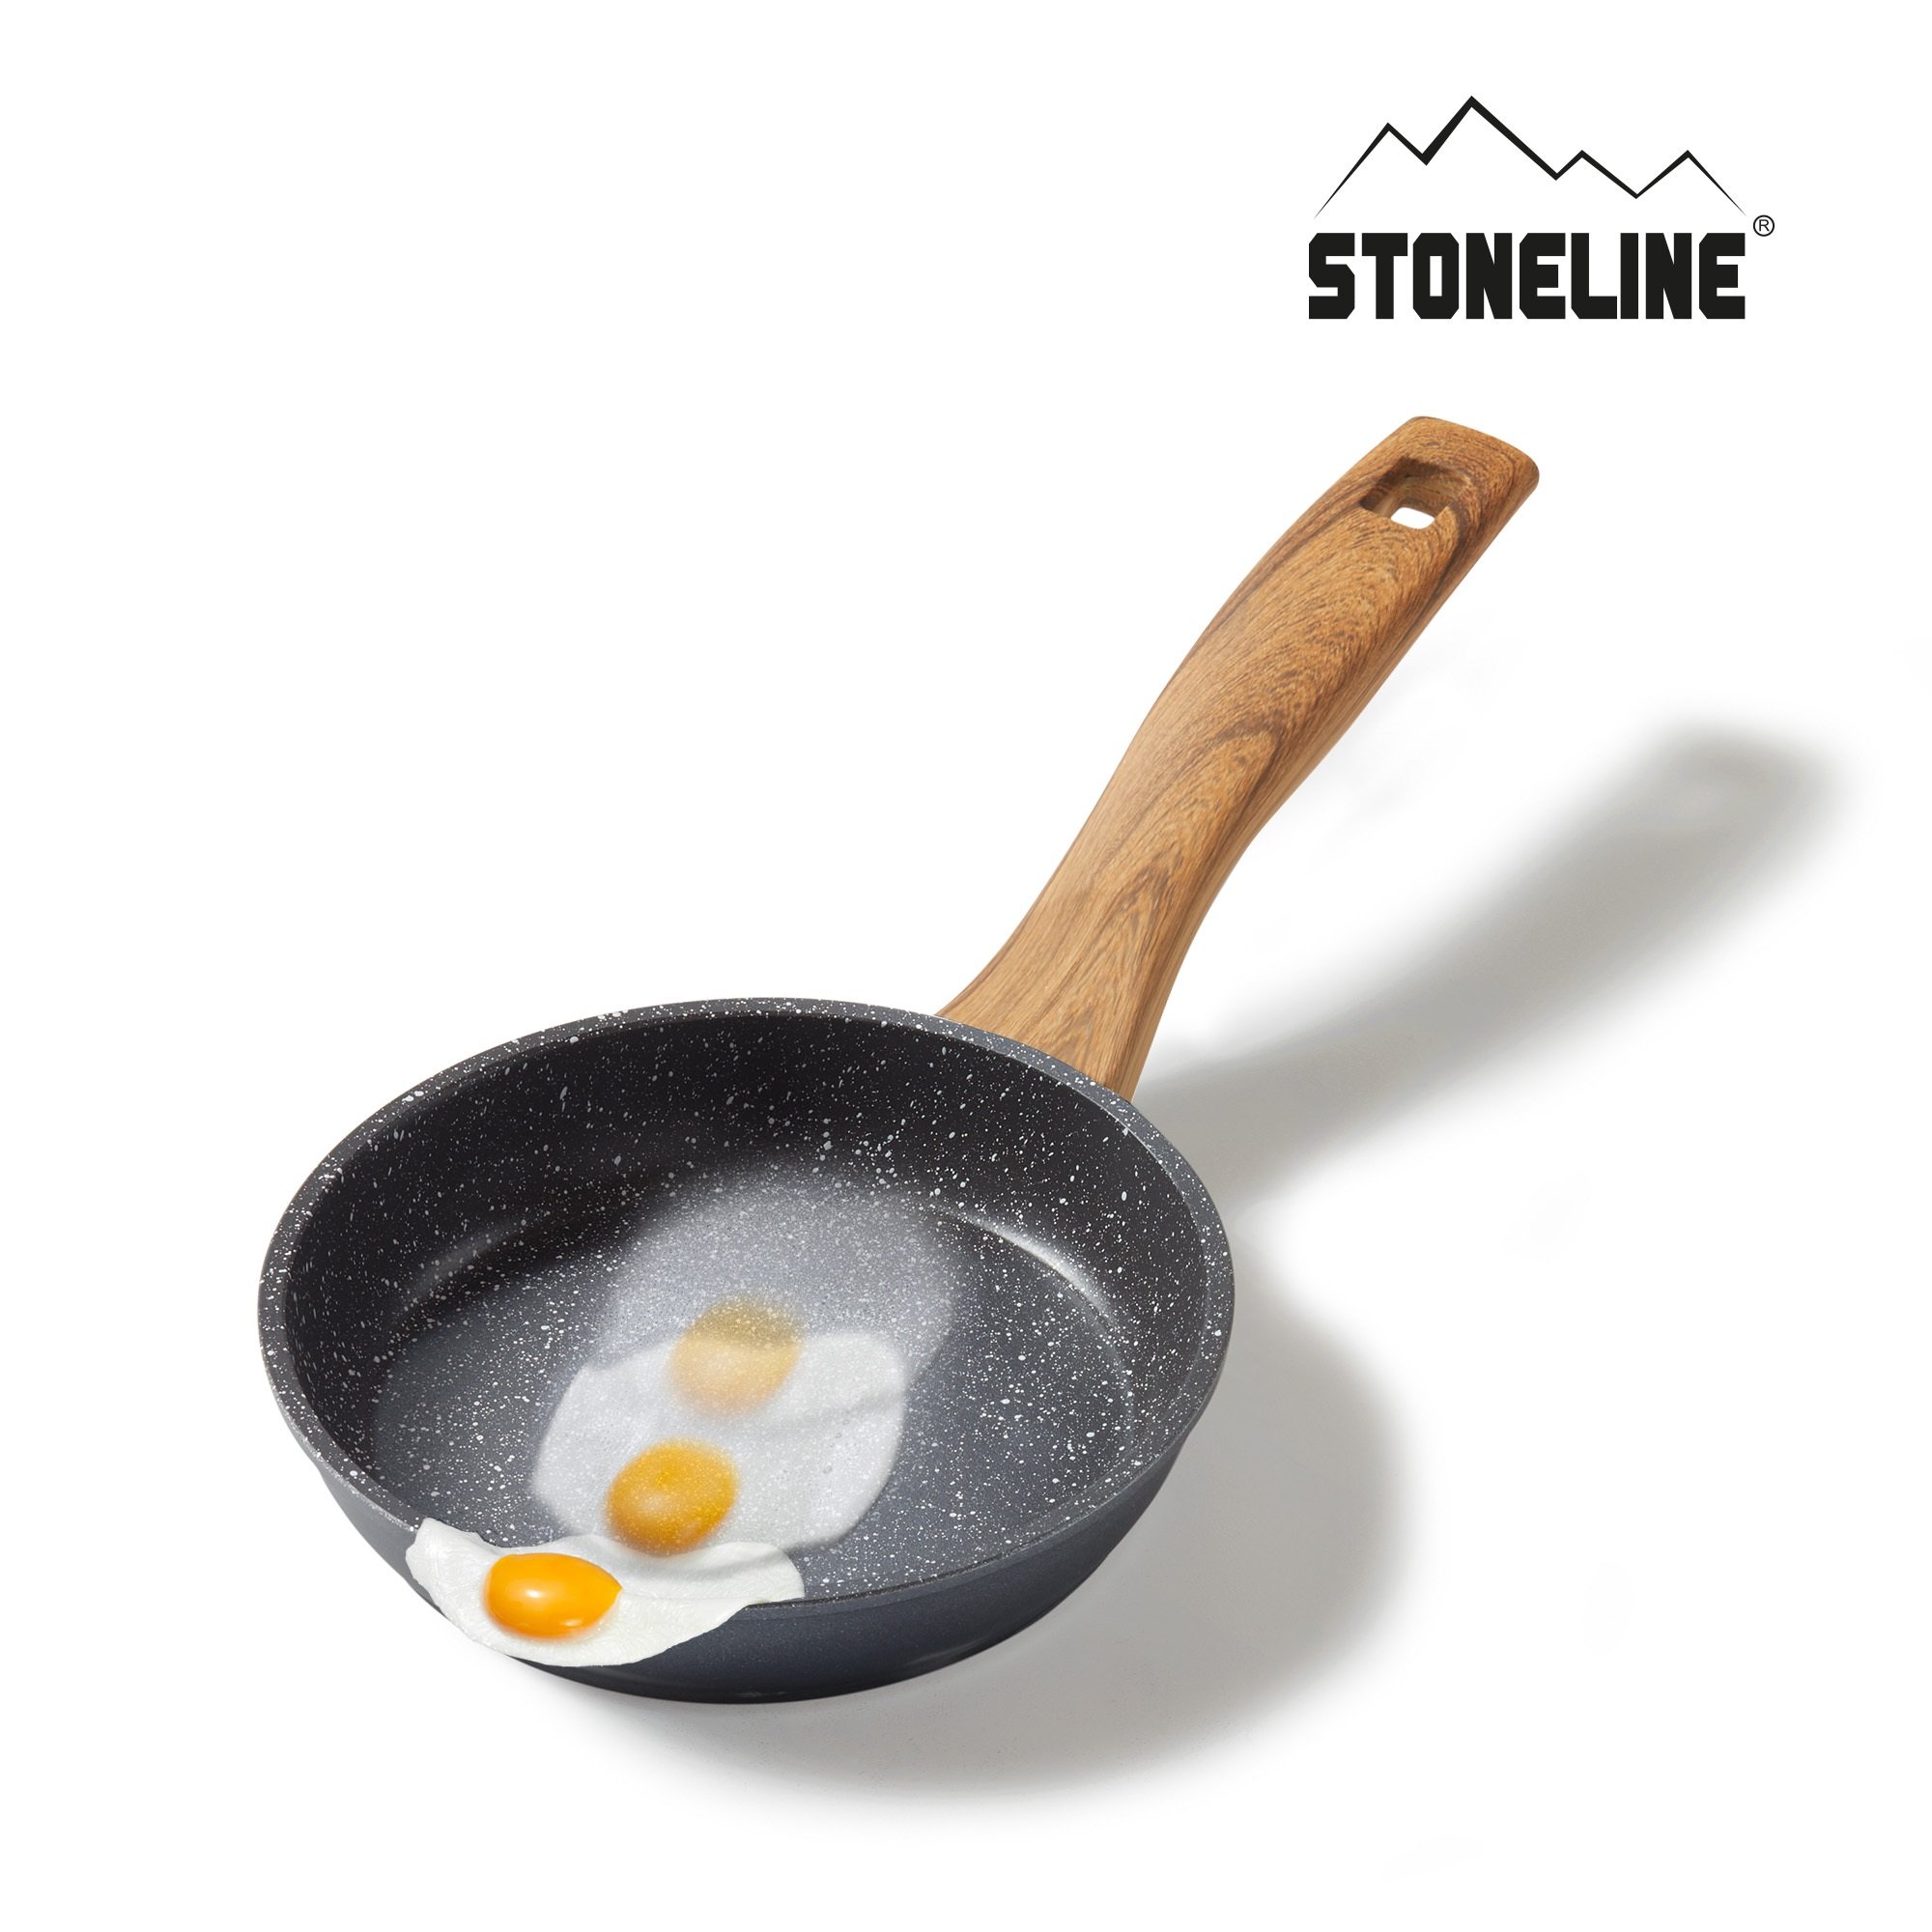 STONELINE® Frying Pan 18 cm, Non-Stick Pan, Wood Design | Back to Nature